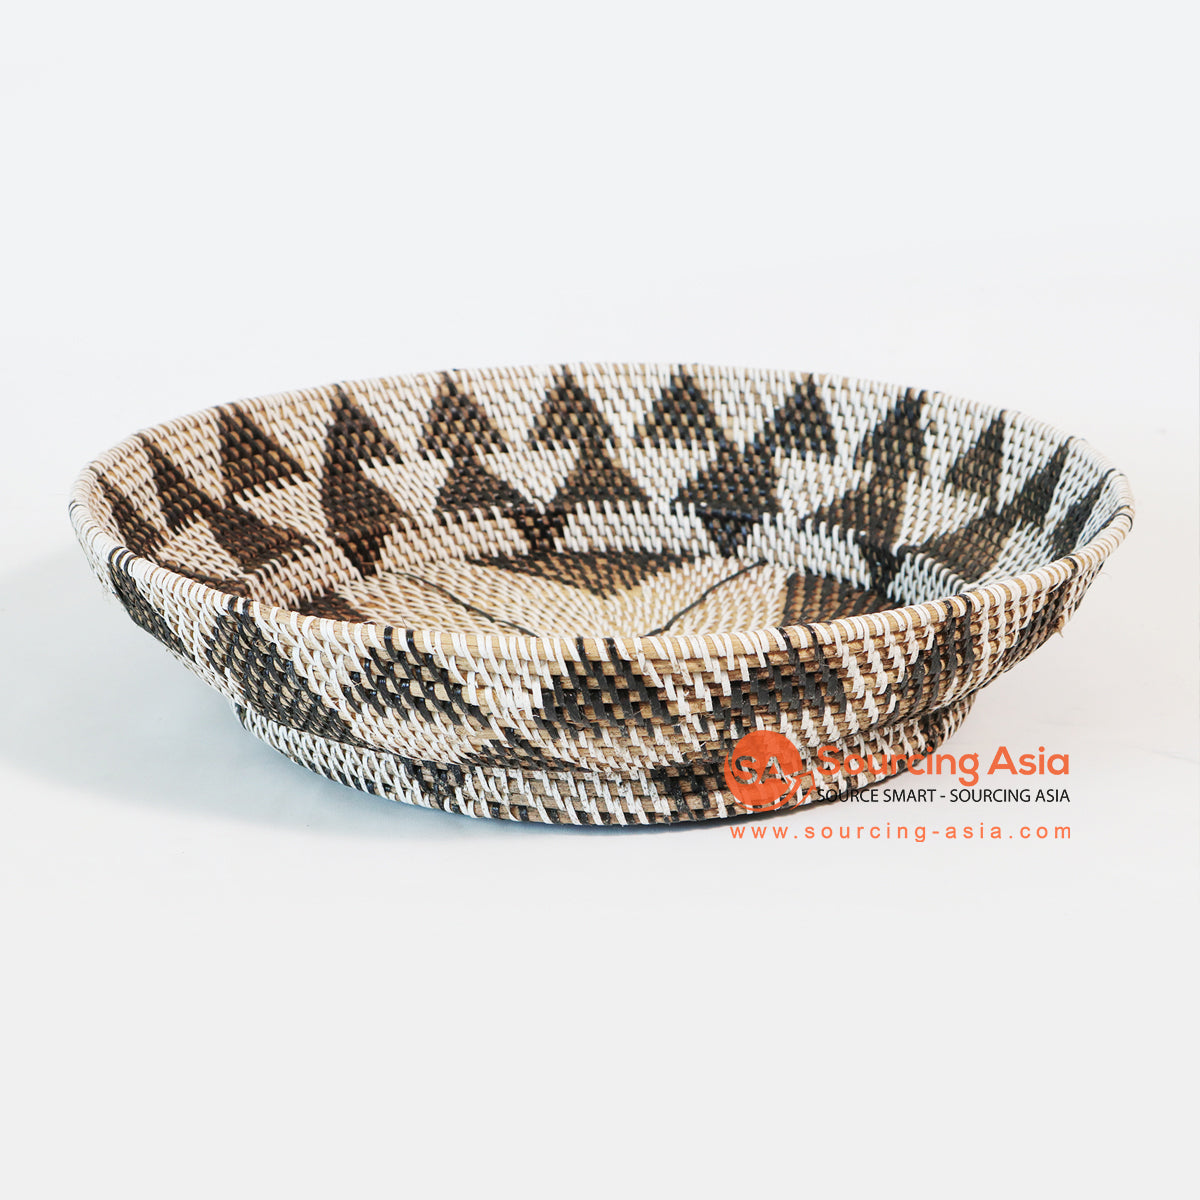 MTIC008 DARK BROWN AND NATURAL WOVEN RATTAN TRAY